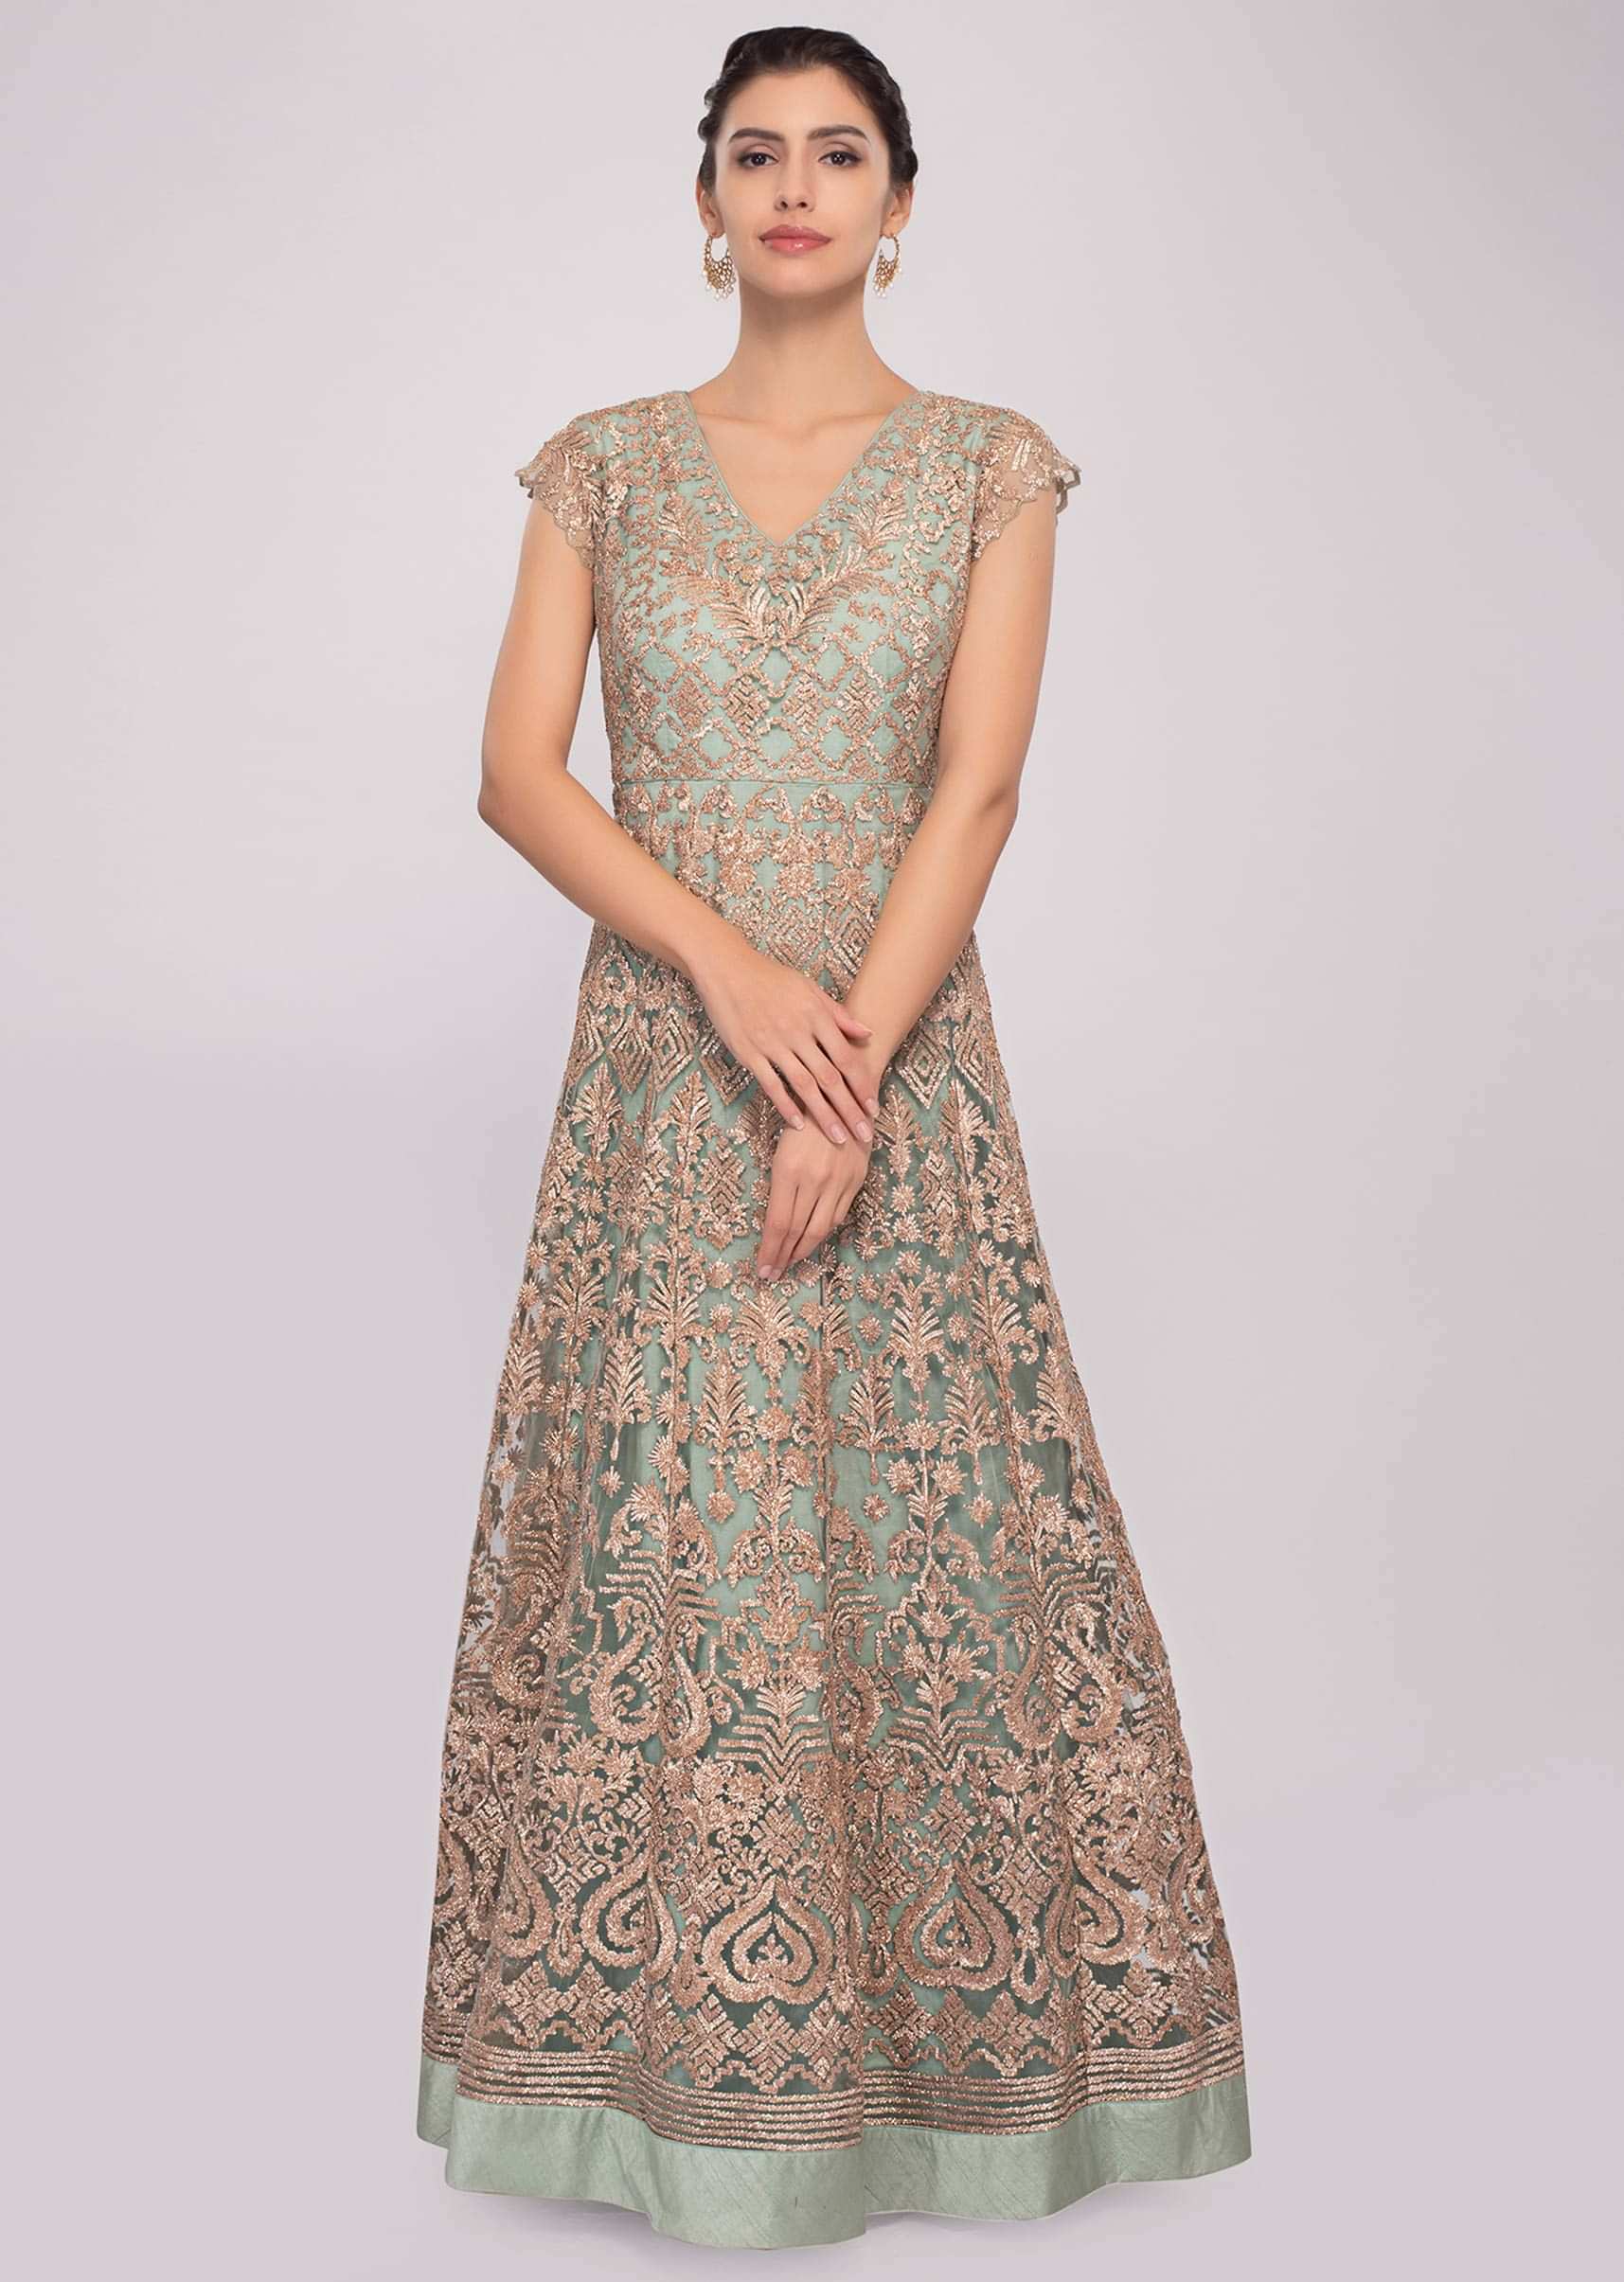 Pista green embroidered anarkali suit in net and  satin 